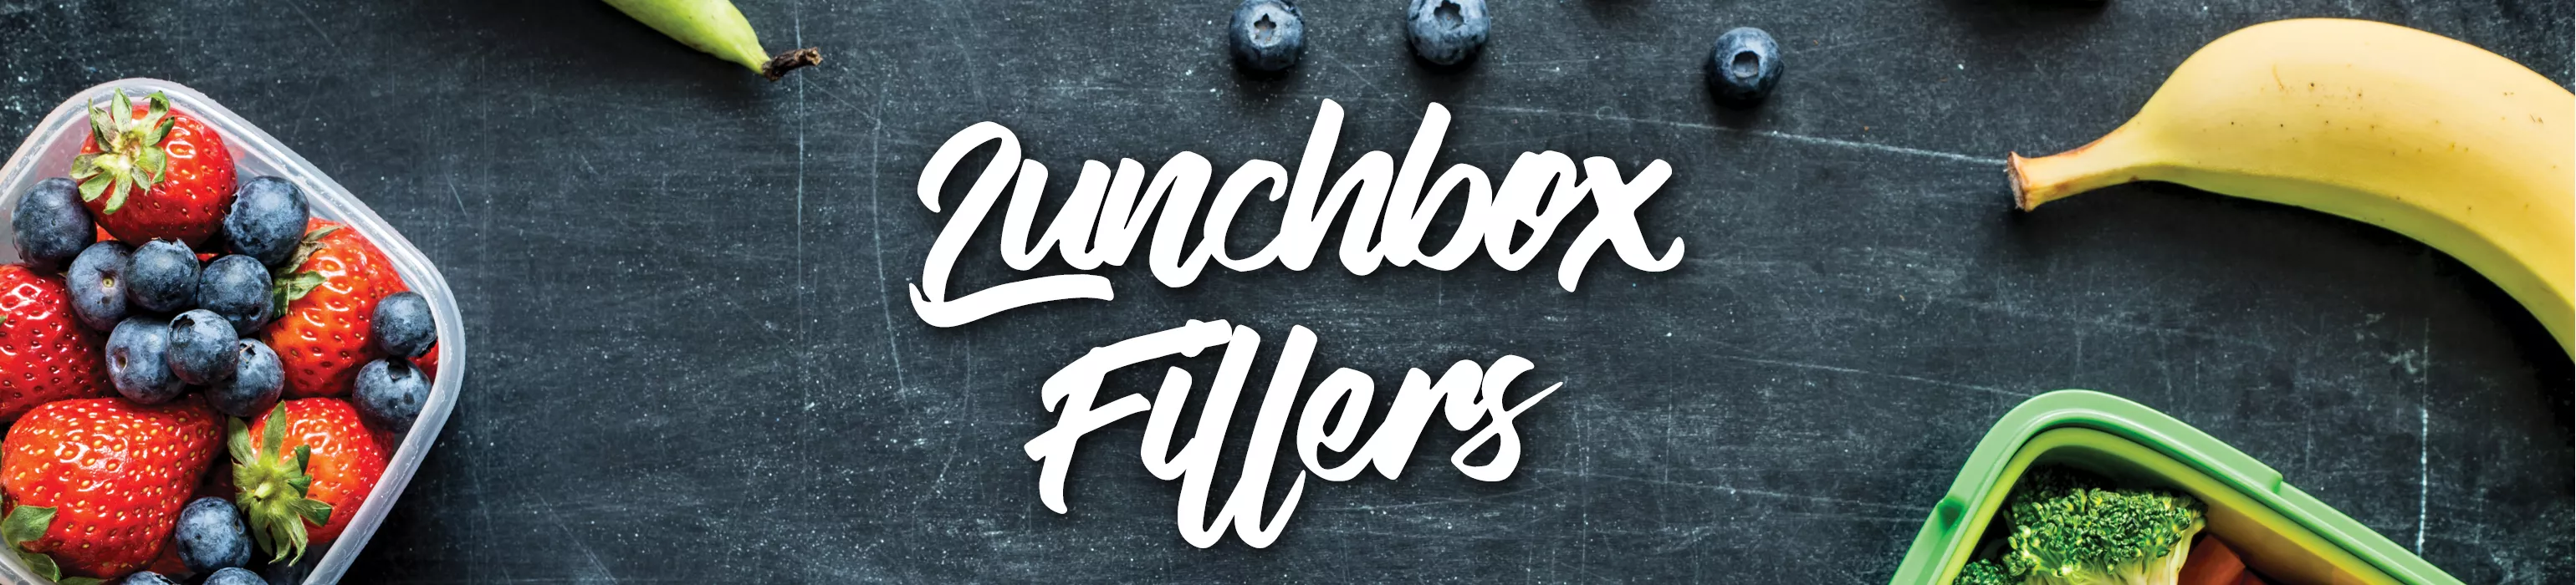 Lunchbox fillers